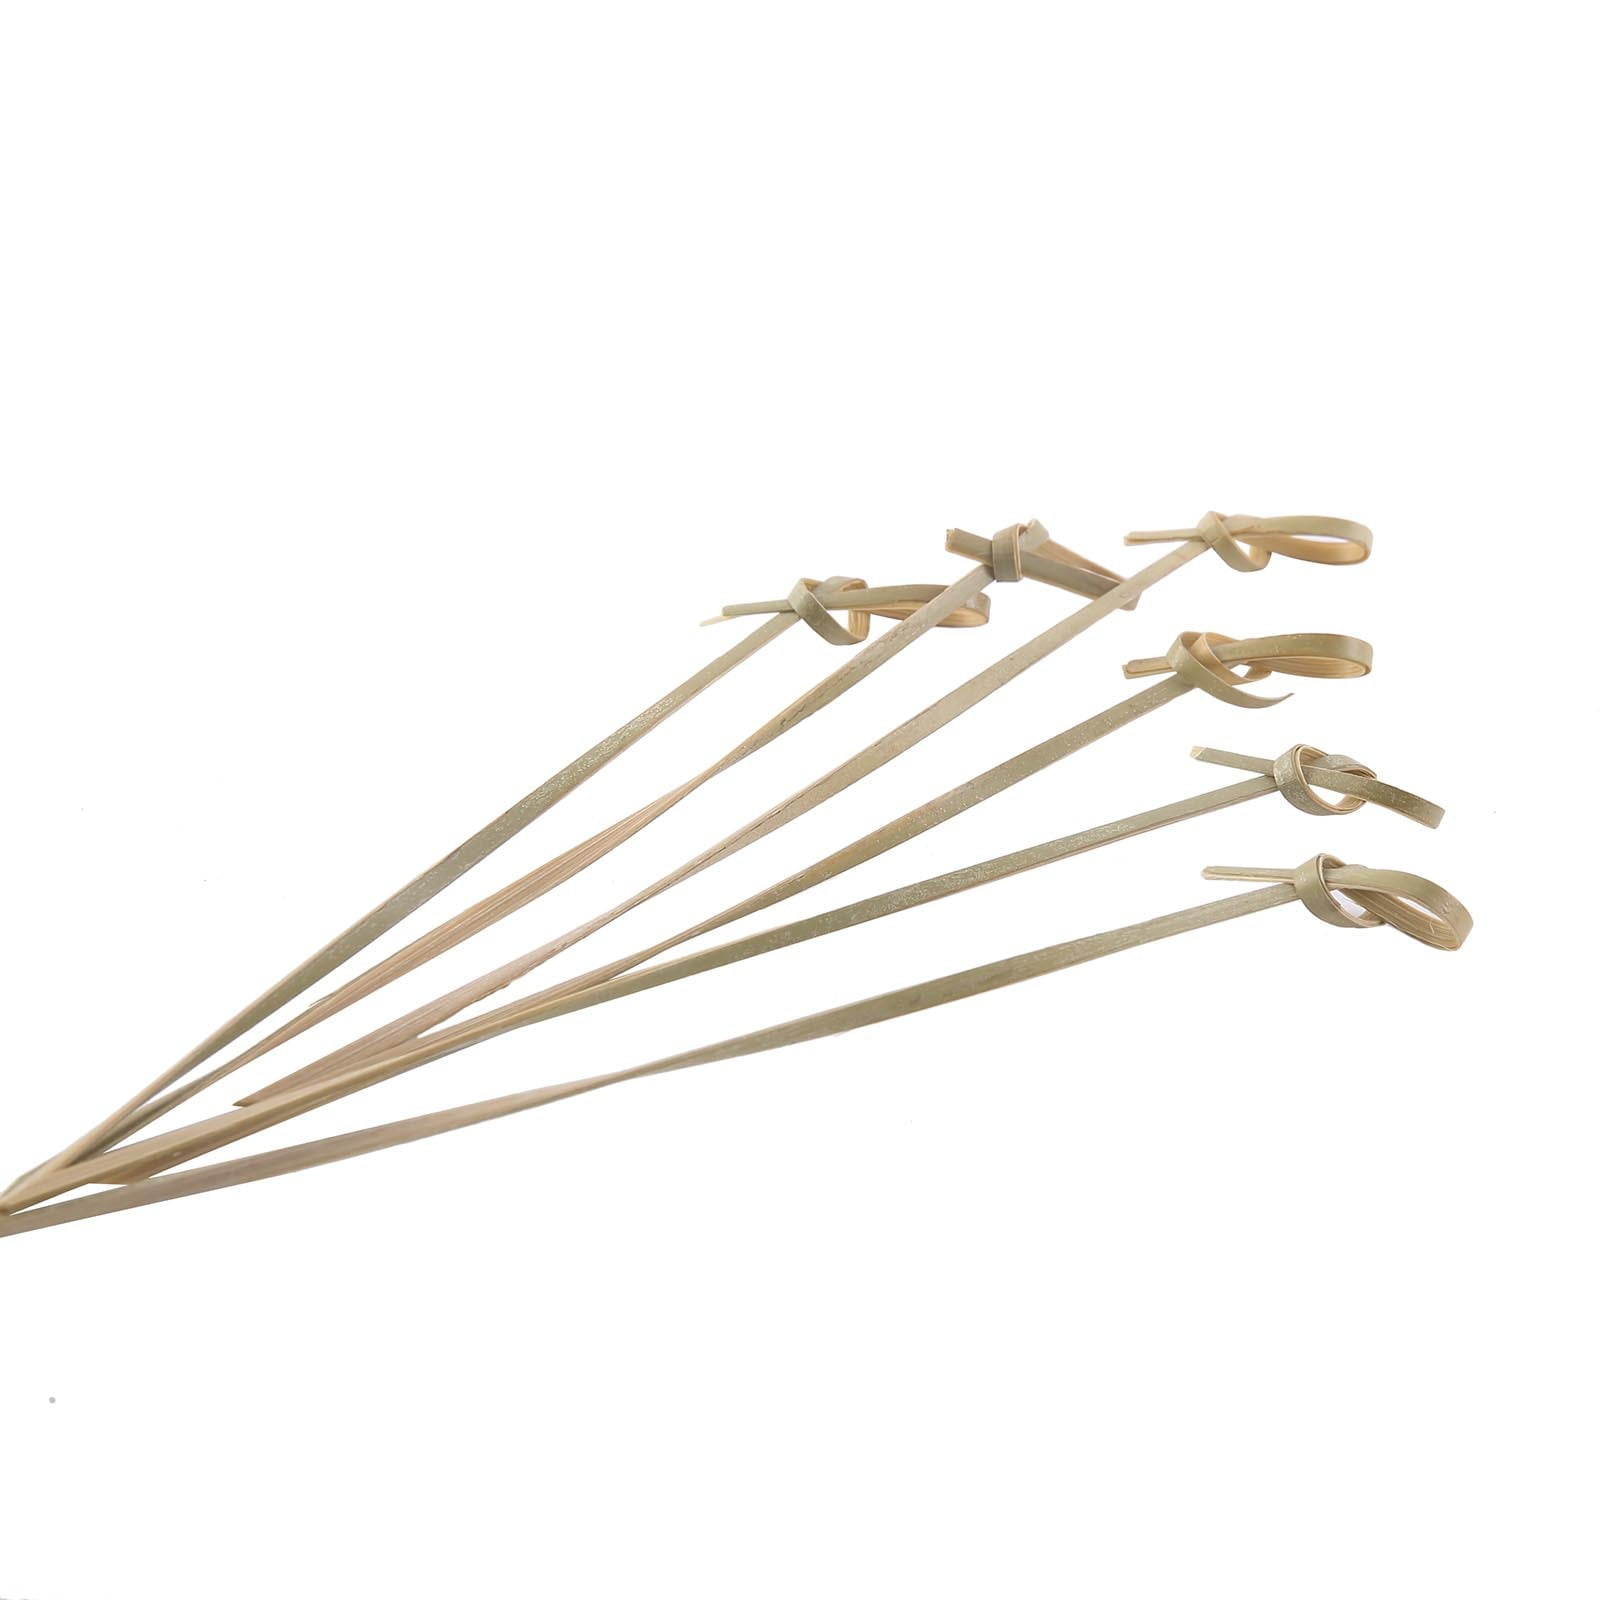 A Little Bit Twisted - Cocktail Picks and Stirring Sticks